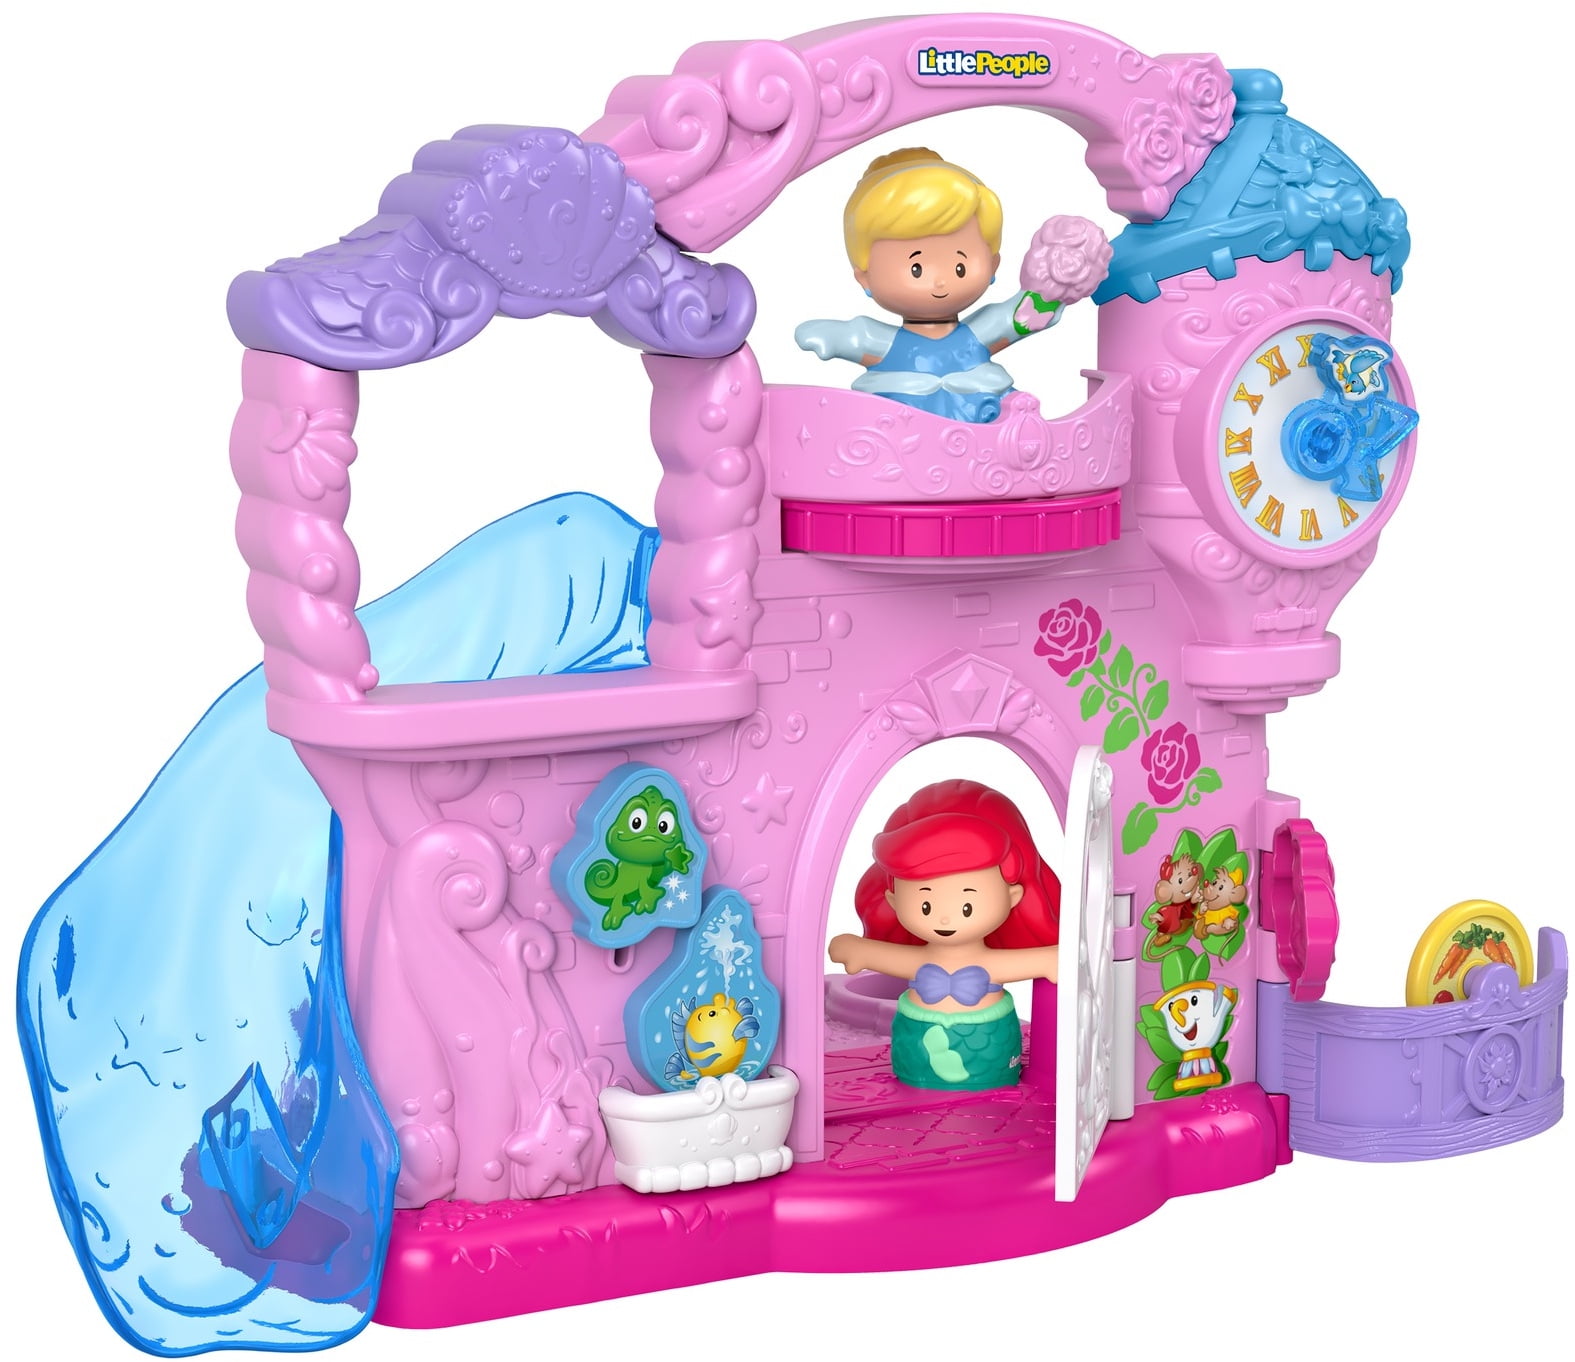 Disney Princess Play & Go Castle Playset by Little People